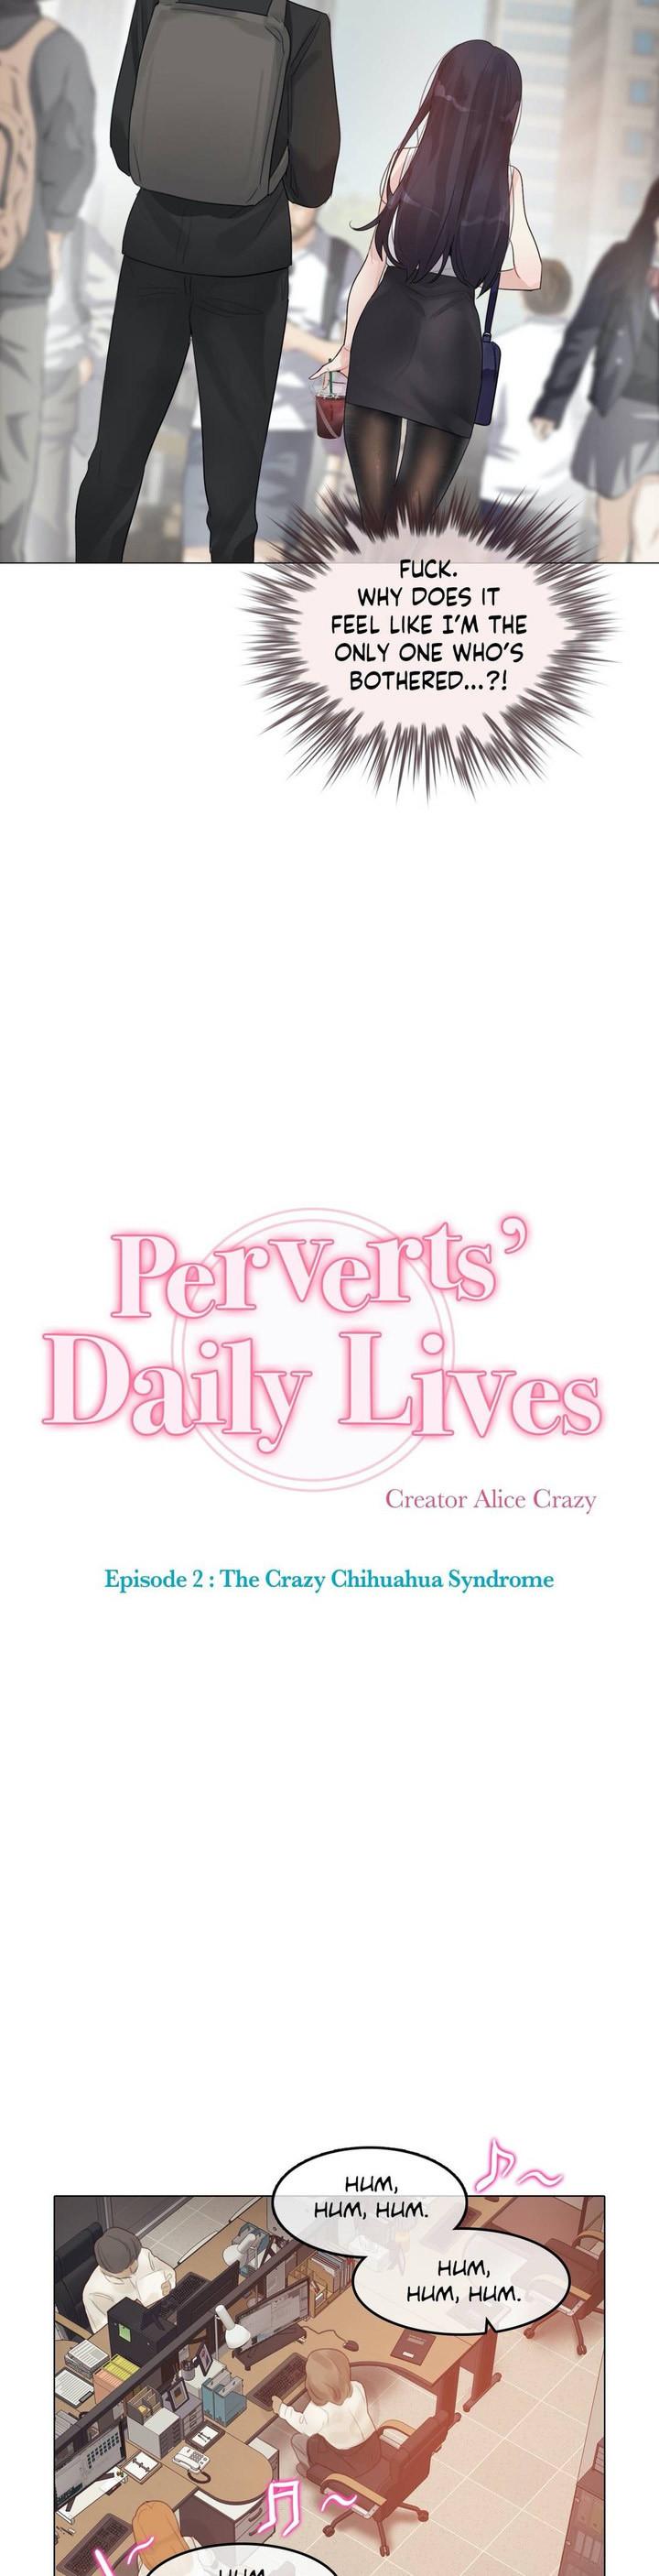 Perverts' Daily Lives Episode 2: Crazy Chihuahua Syndrome 102